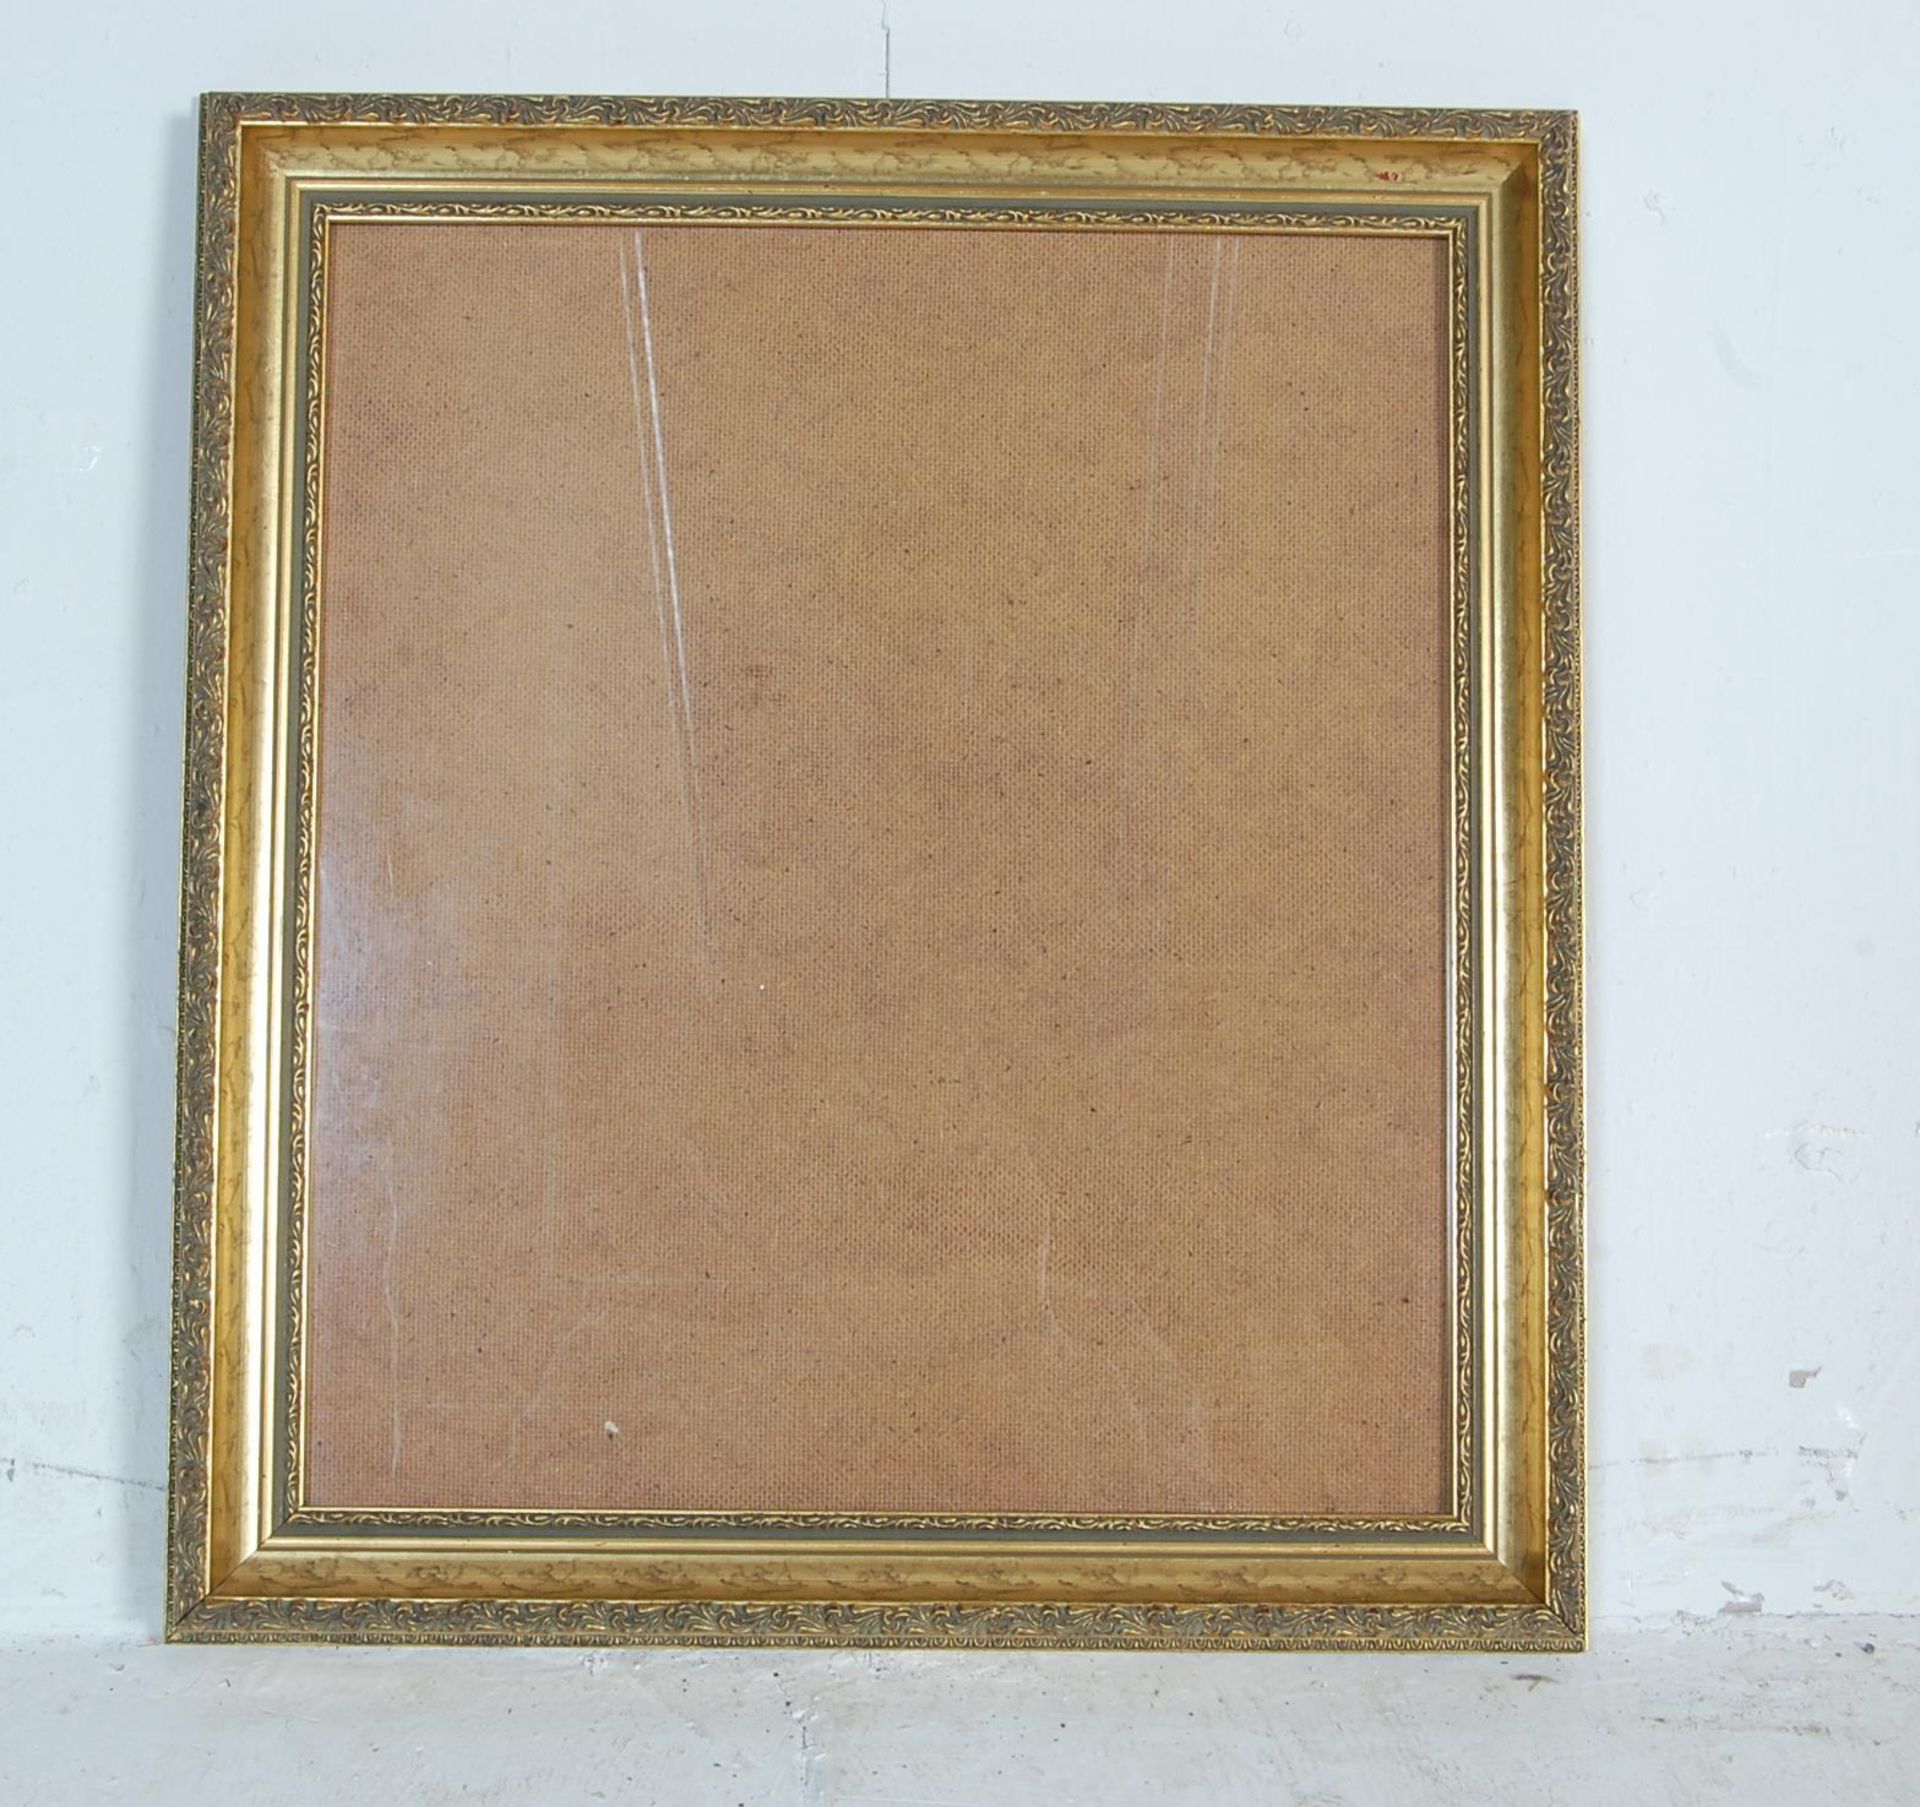 FOUR VINTAGE 20TH CENTURY BAROQUE STYLE GILDED PICTURE FRAMES - Image 21 of 25